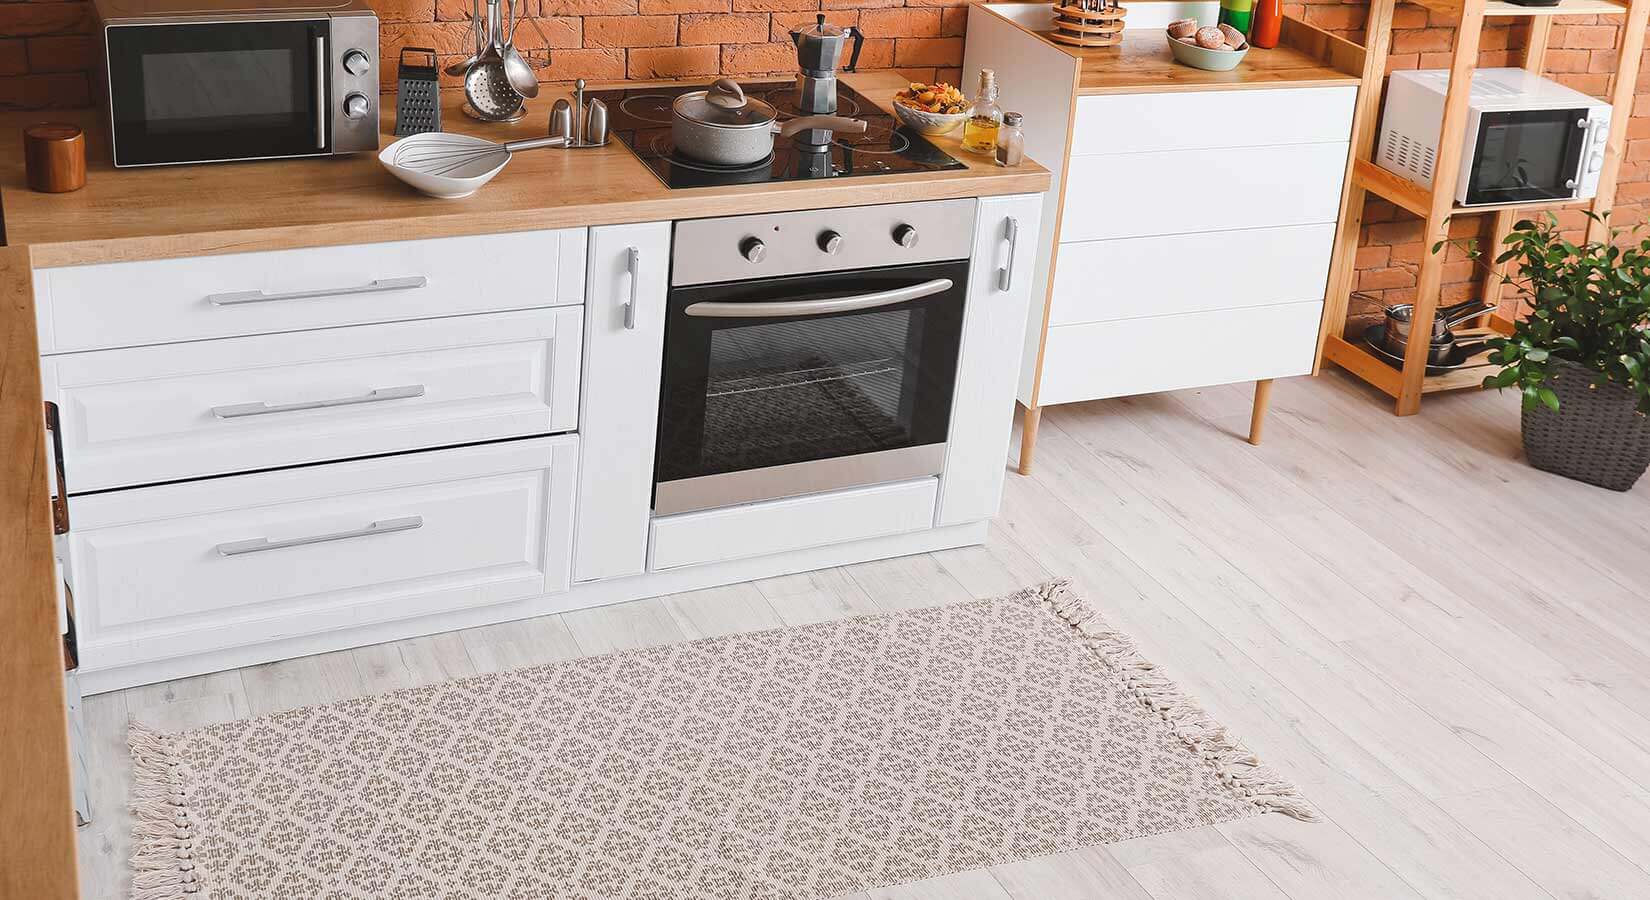 Tiny kitchen with white cabinets, wood countertops, and gray and cream patterned rug.